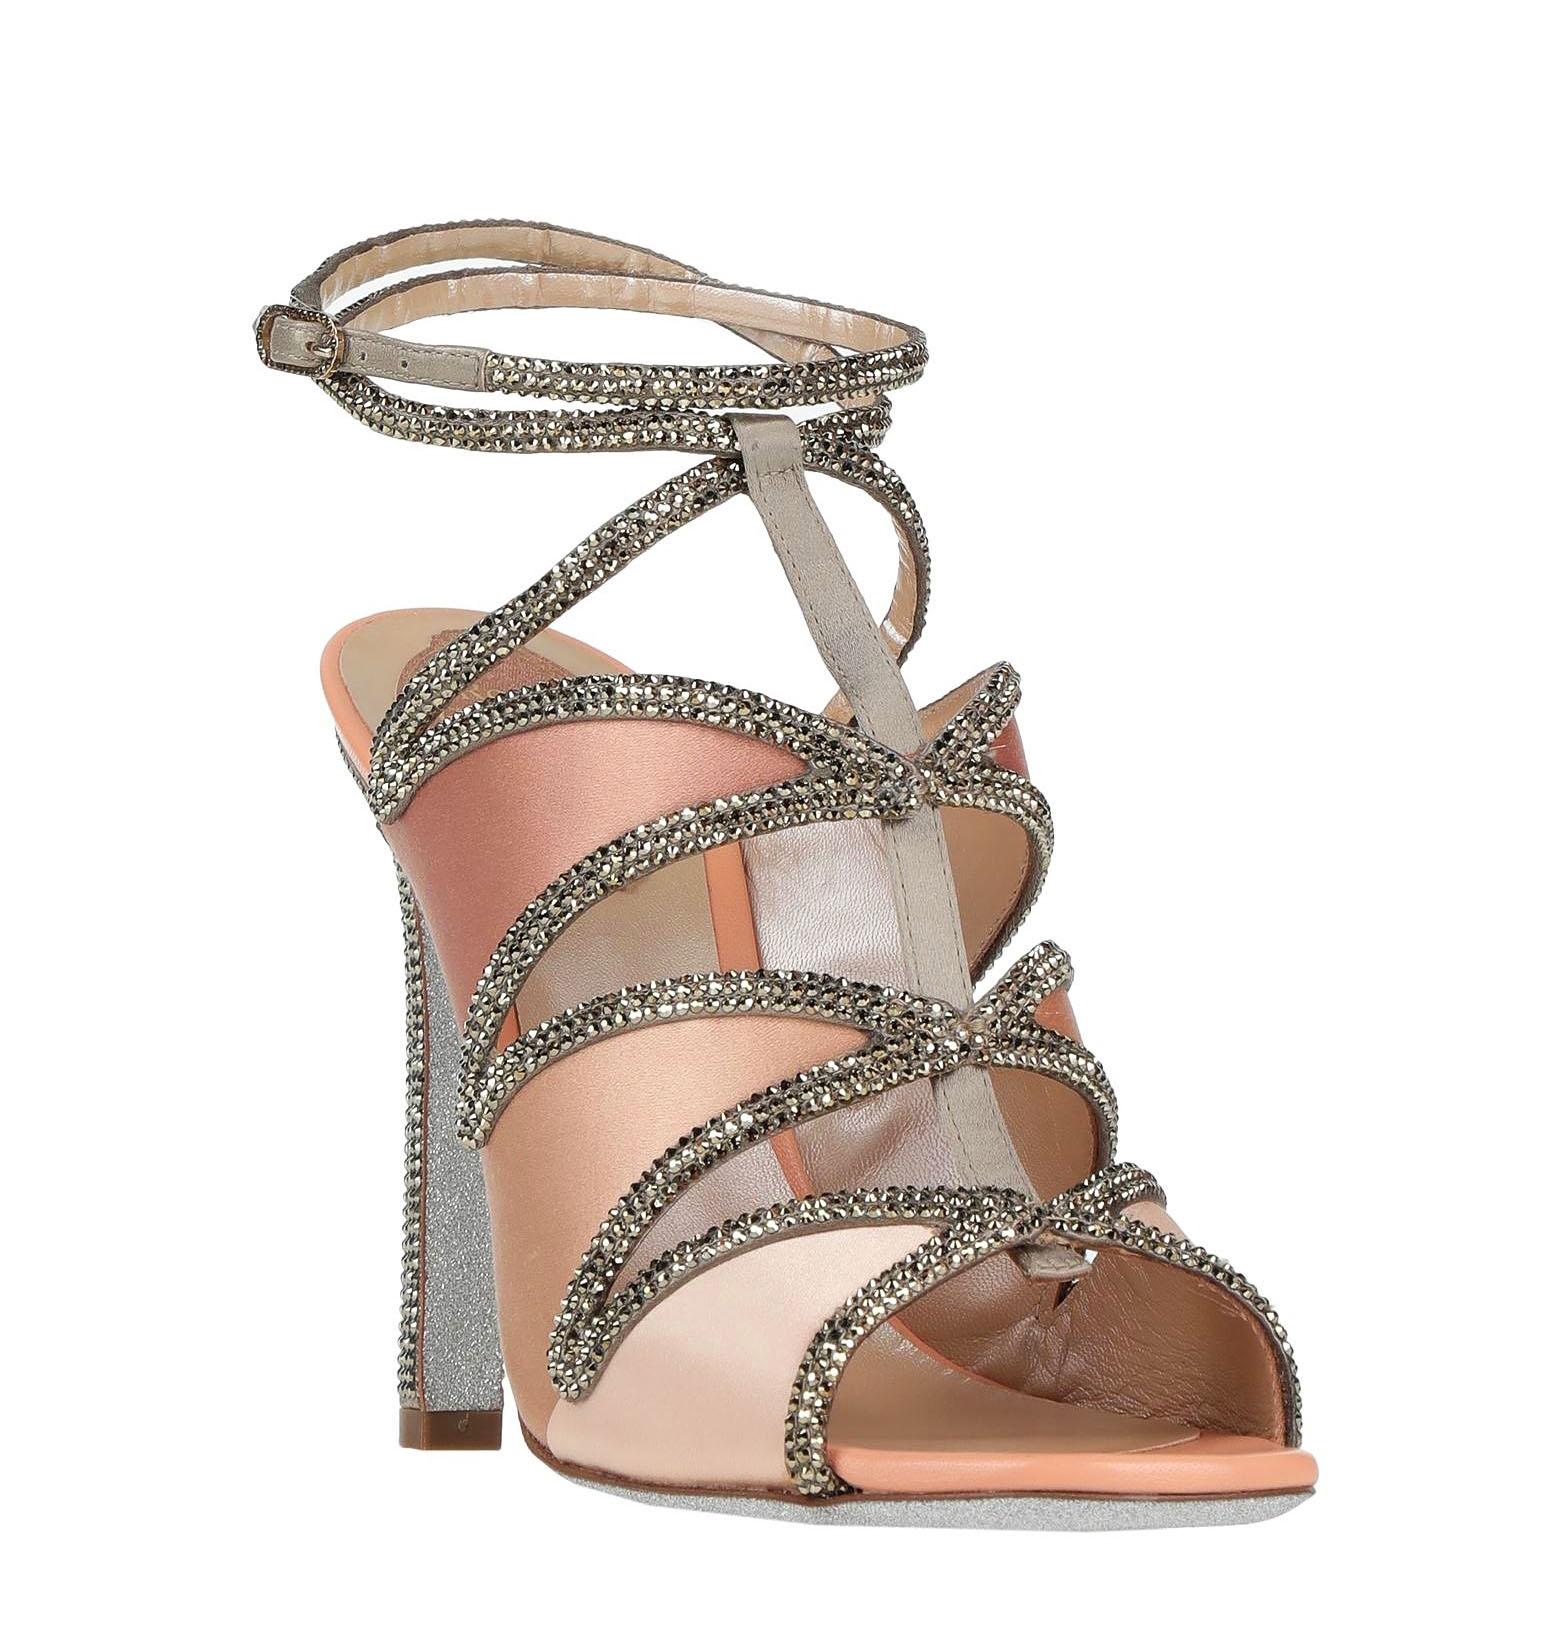 New Rene Caovilla Satin Crystal Embellished T-Strap Sandals
Italian size - 38
Phard Nude Color, Cut-Out Detail, T-Strap Style, Crystal Embellished, Leather Insole, Glitter Sole.
Heel Height - 4.5 inches
Made in Italy.
New with box.